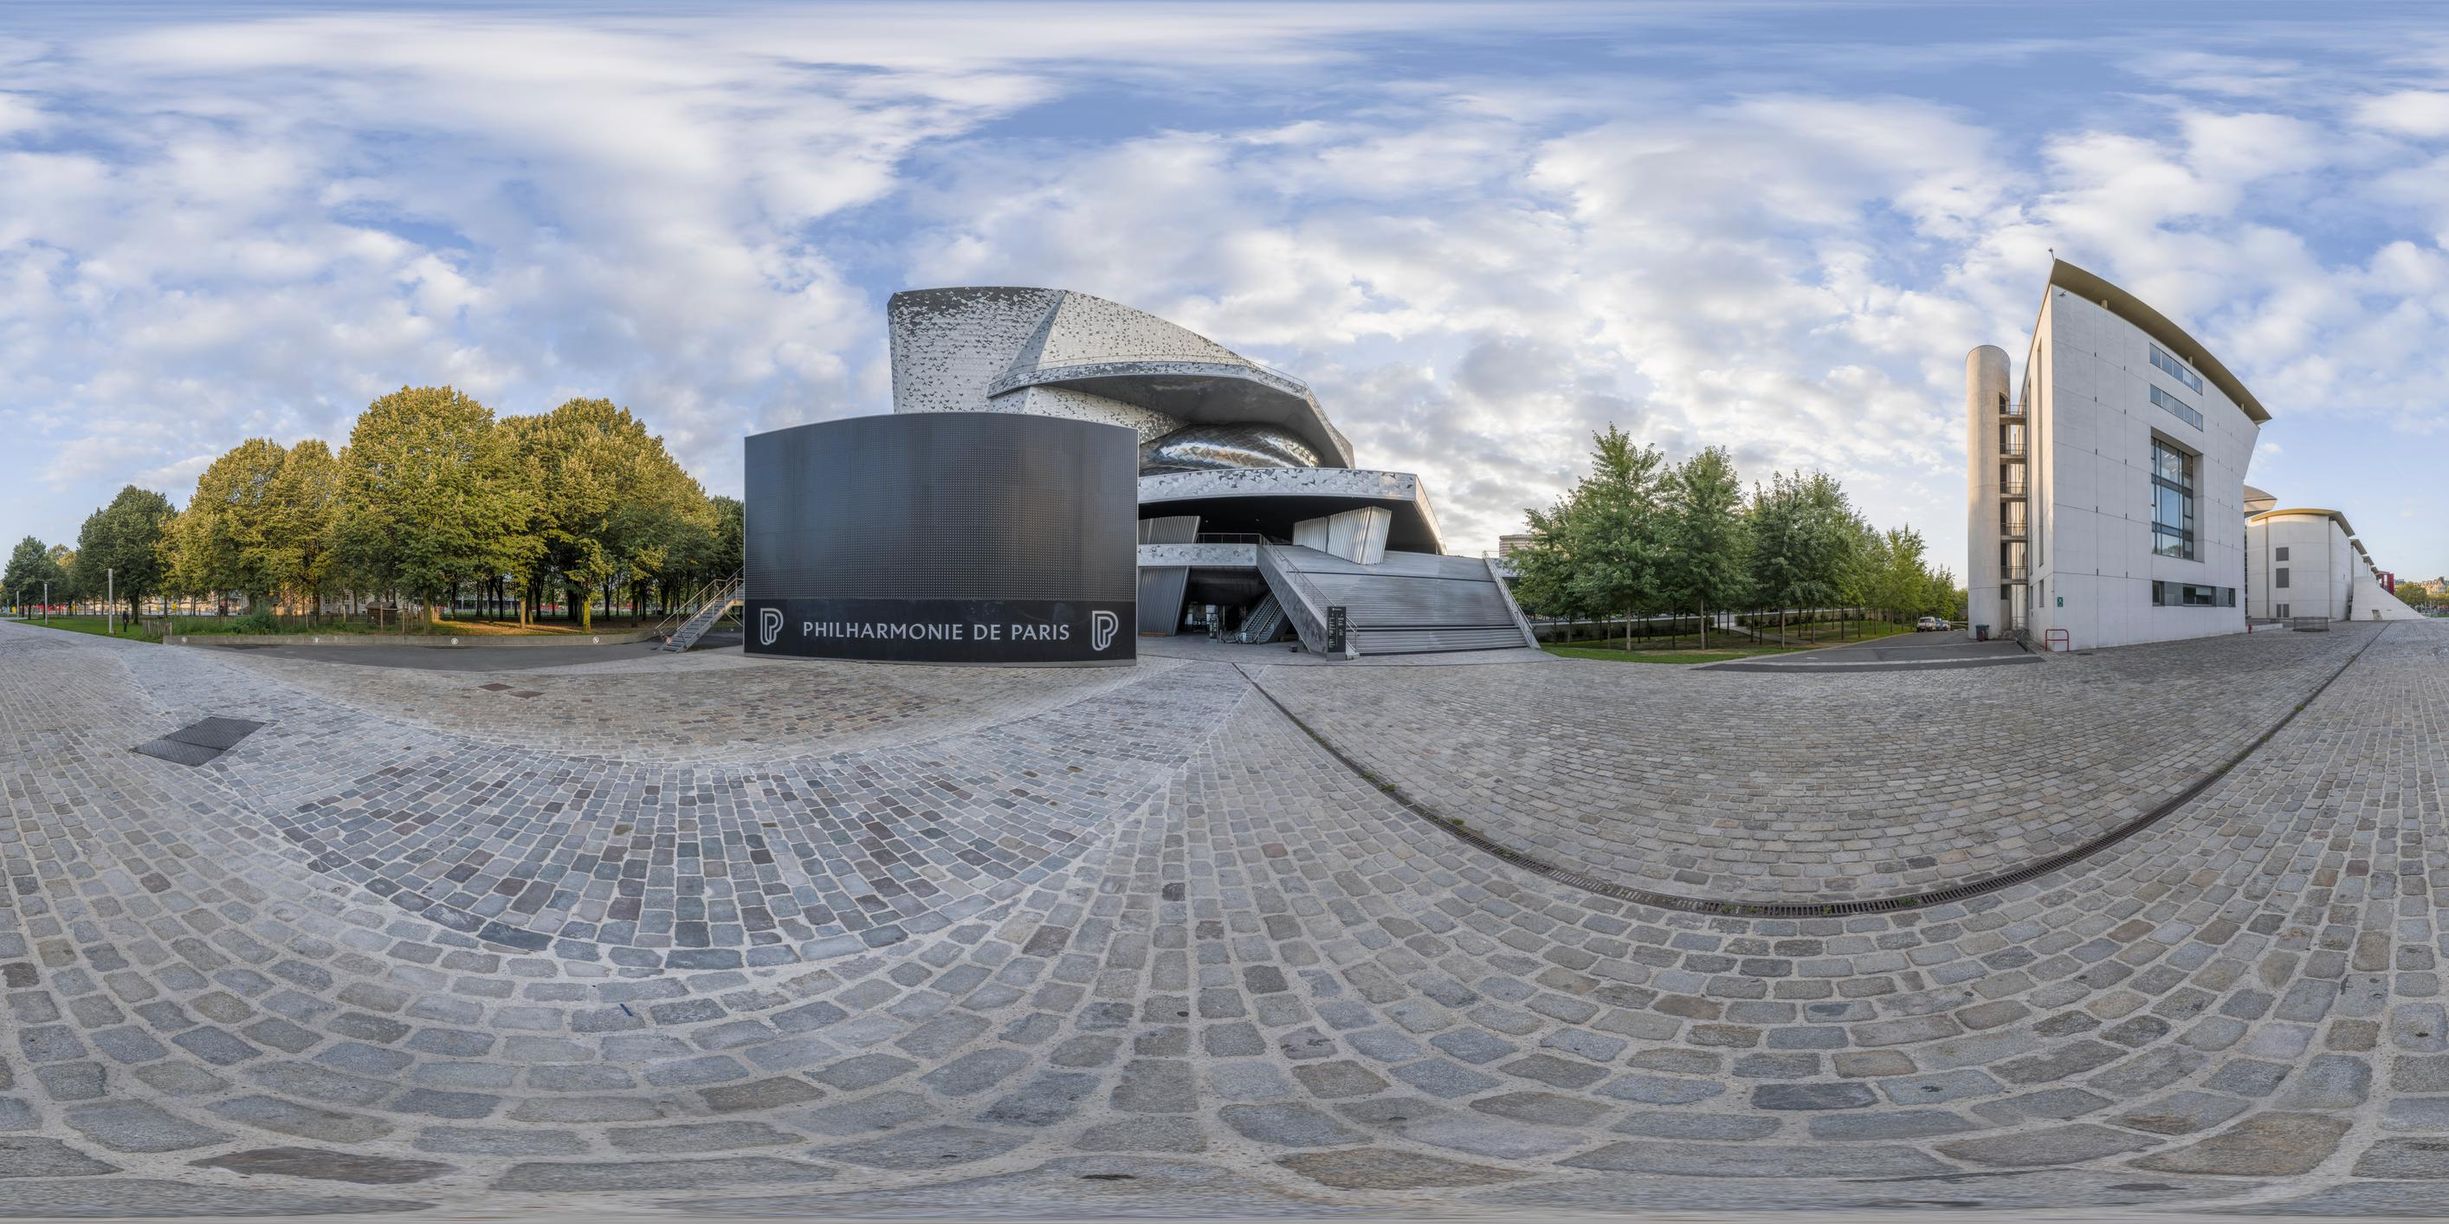 a fisheye lens image of the exterior of the museum in prague, where a monument has been turned